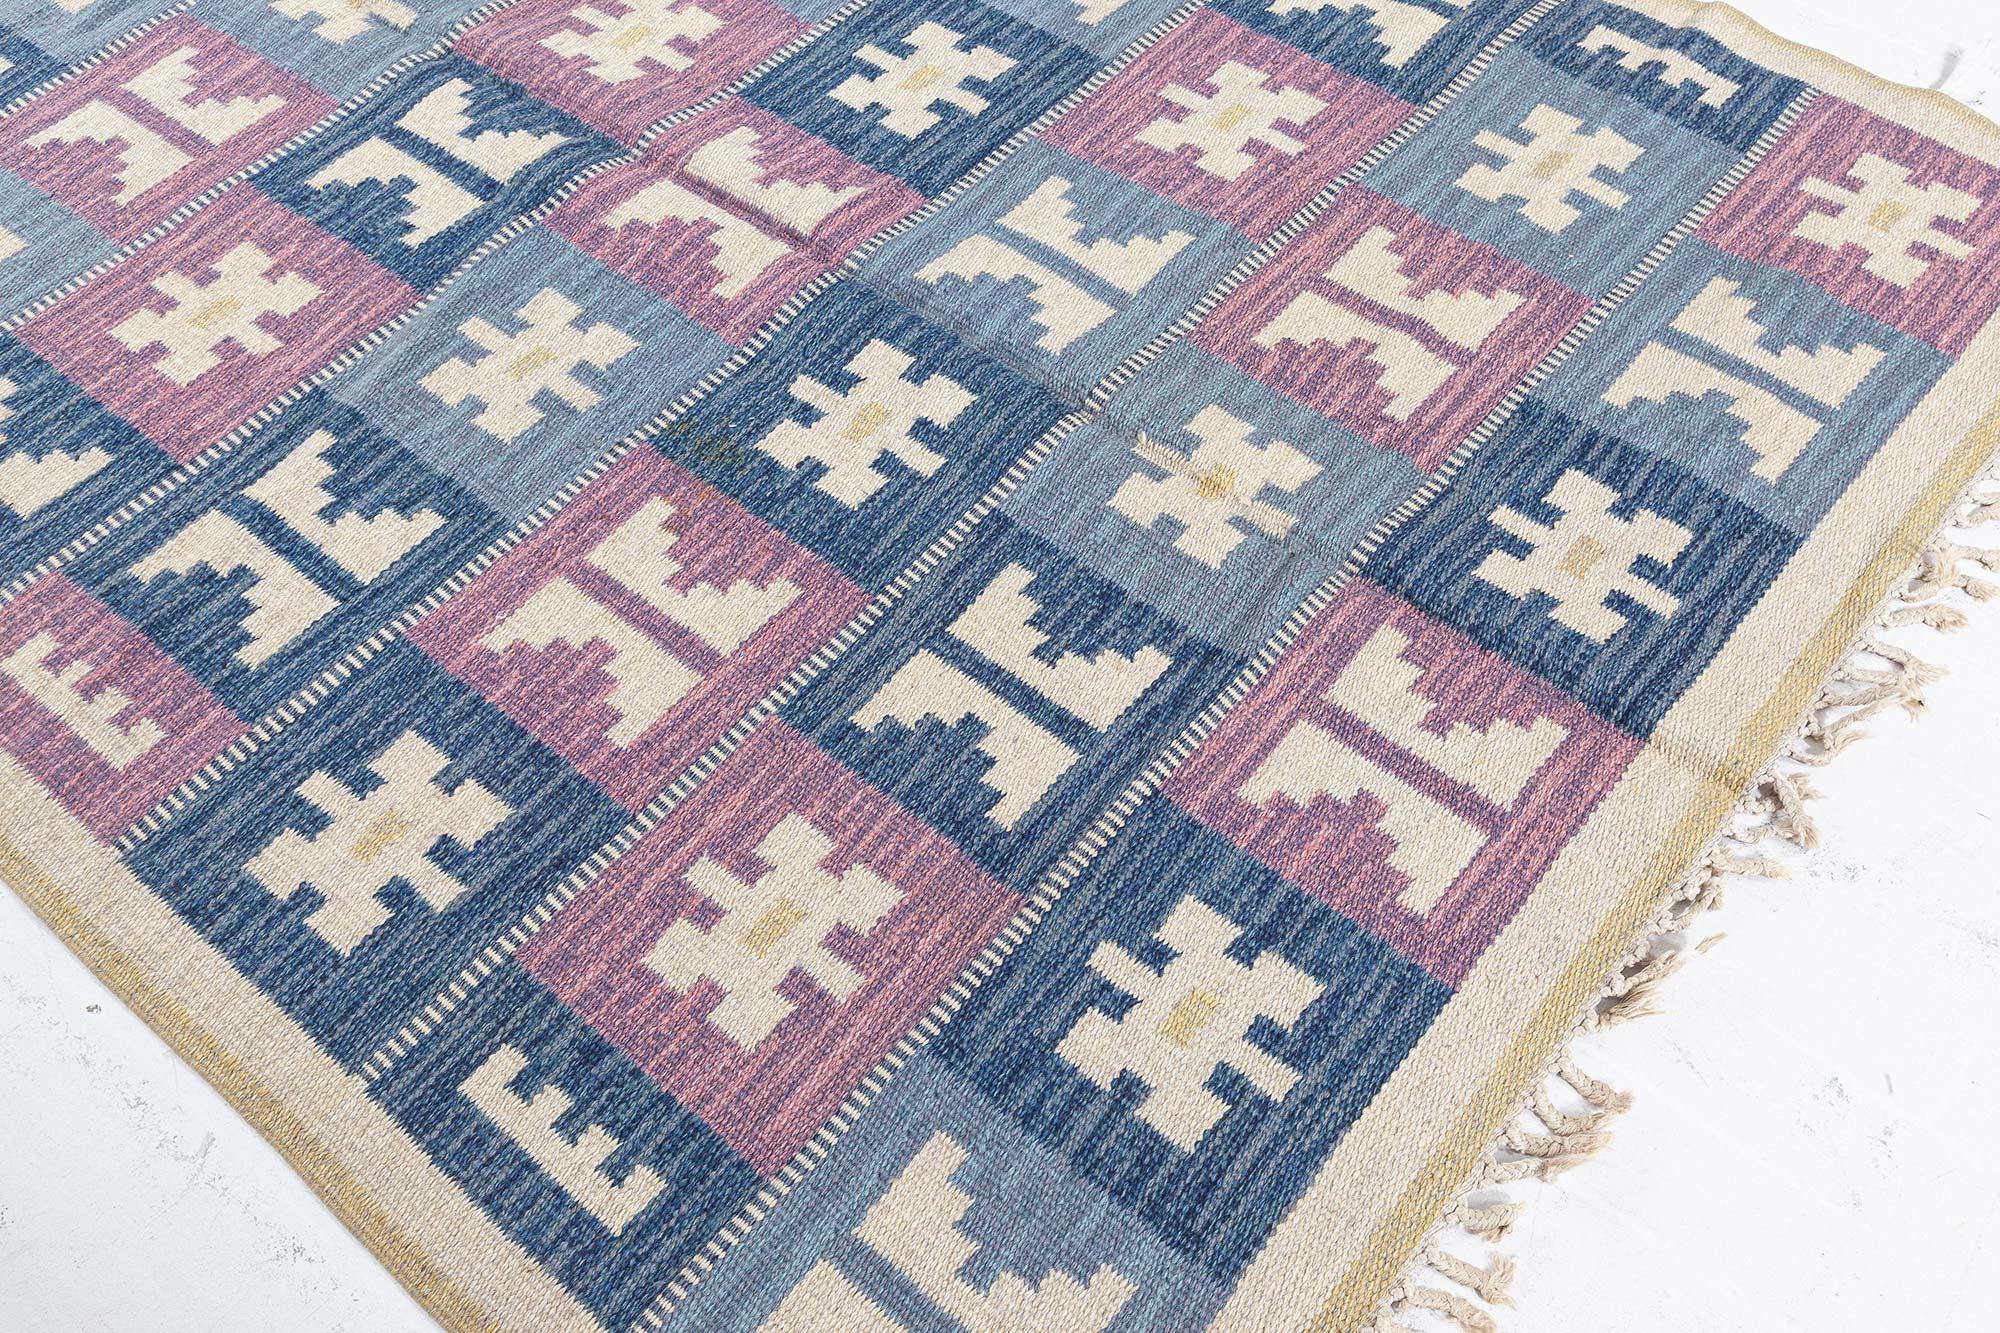 Vintage Swedish Geometric Flat-Weave by Anna-Greta Sjöqvist In Good Condition For Sale In New York, NY